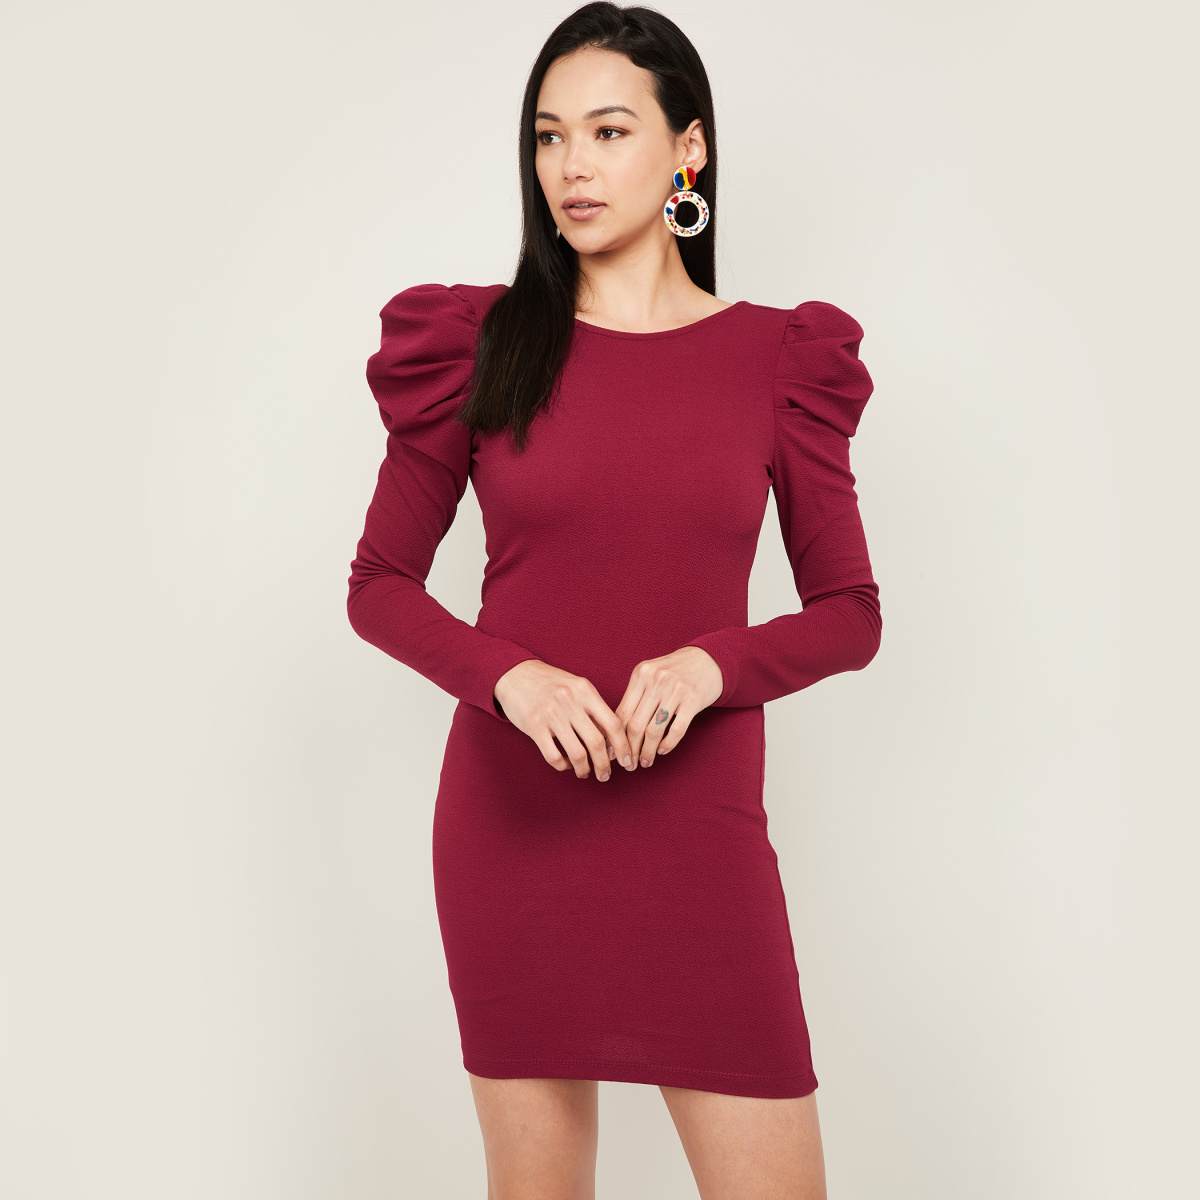 Women night club singers bar sexy dresses red black Pleated waist dress  with open back cutout mini bodycon dresses for female